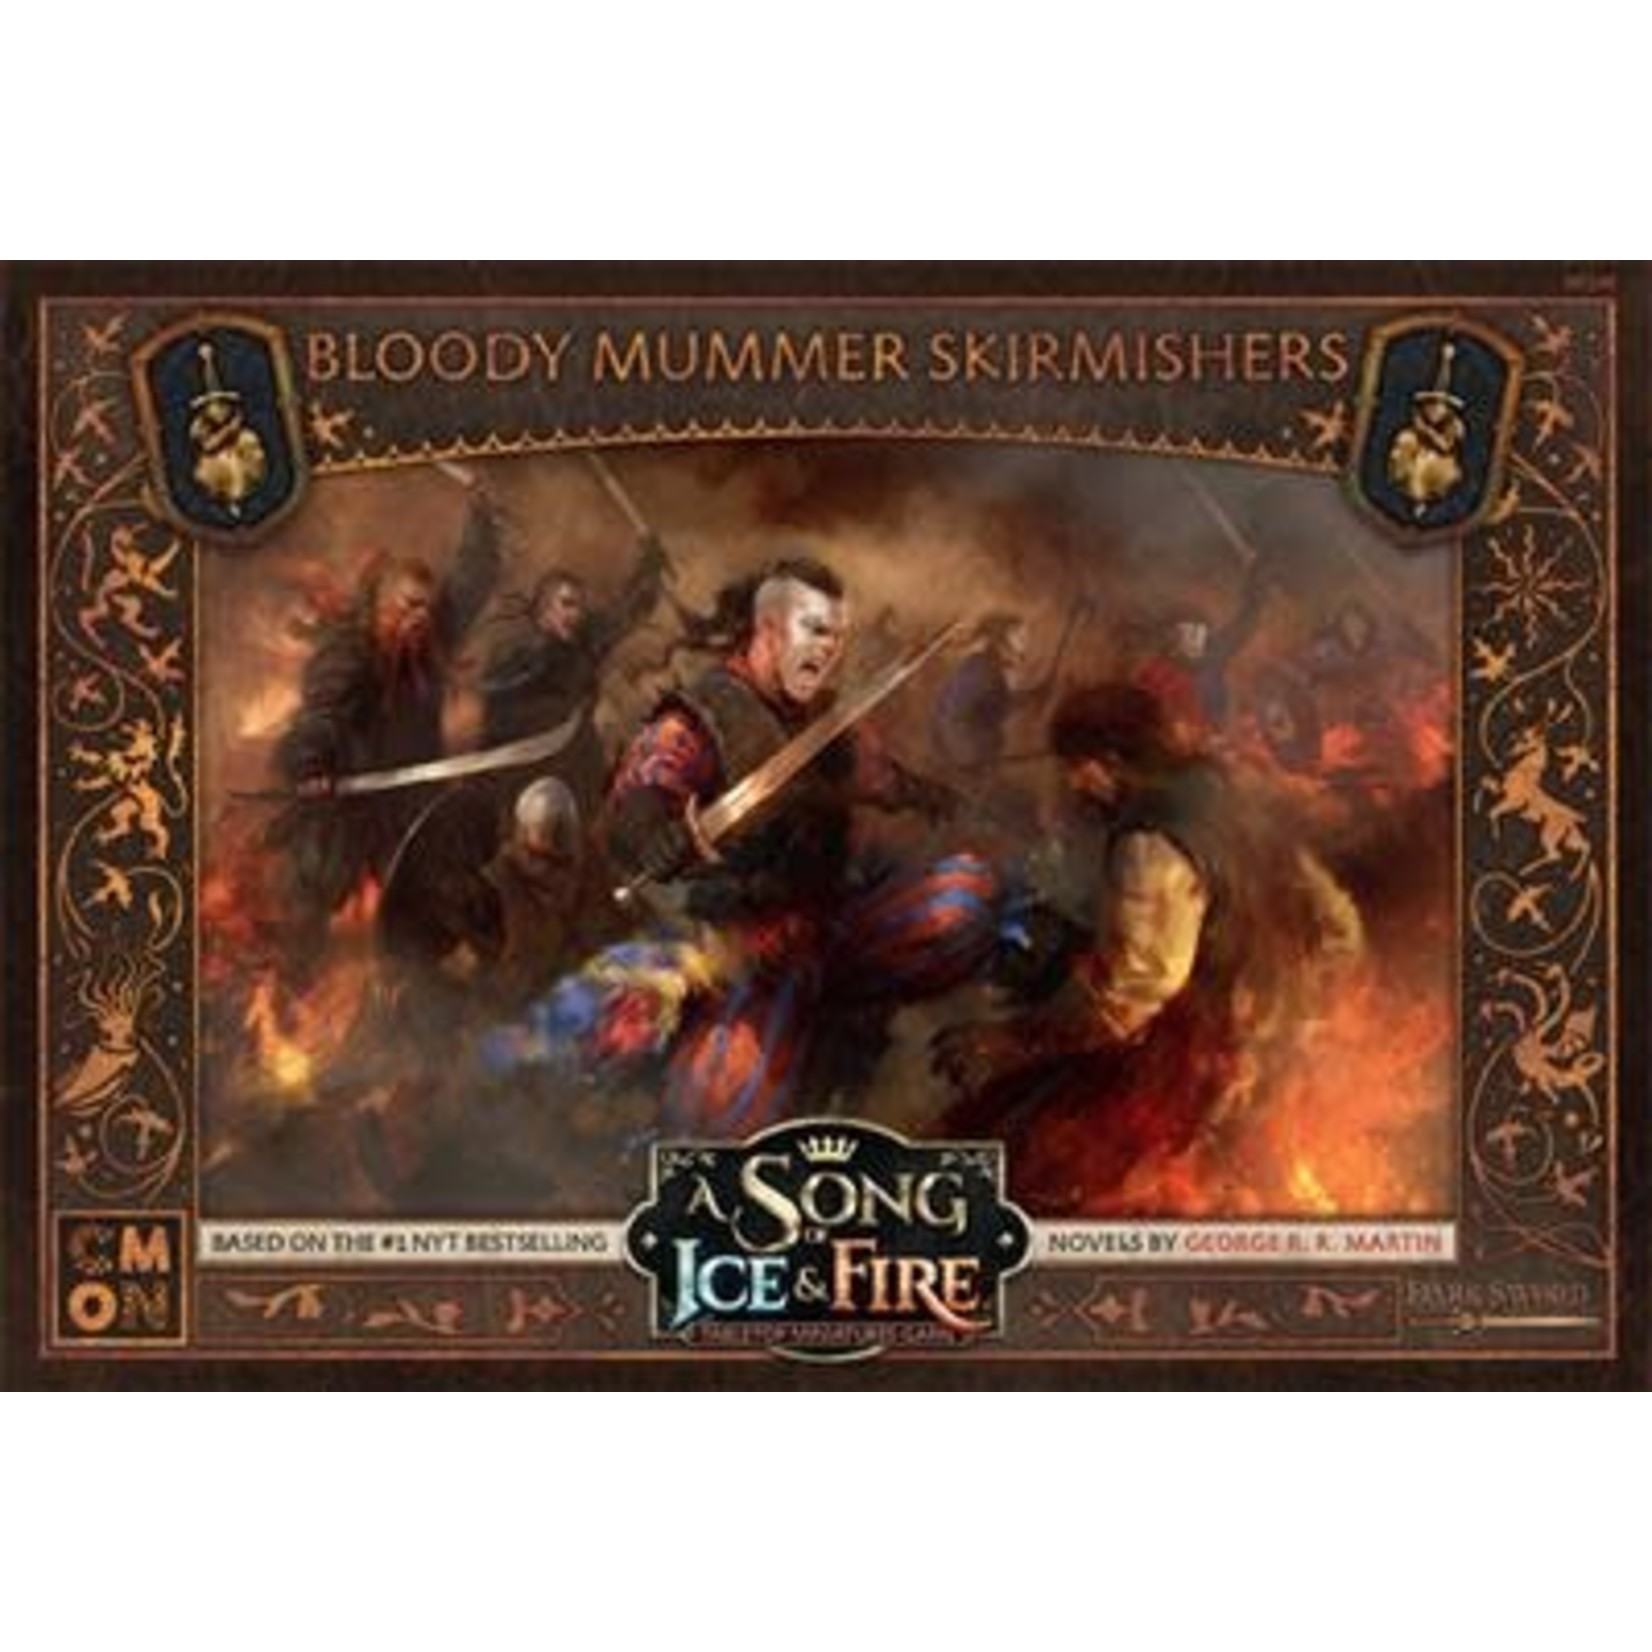 A Song of Ice and Fire - Bloody Mummer Skirmishers Unit Box